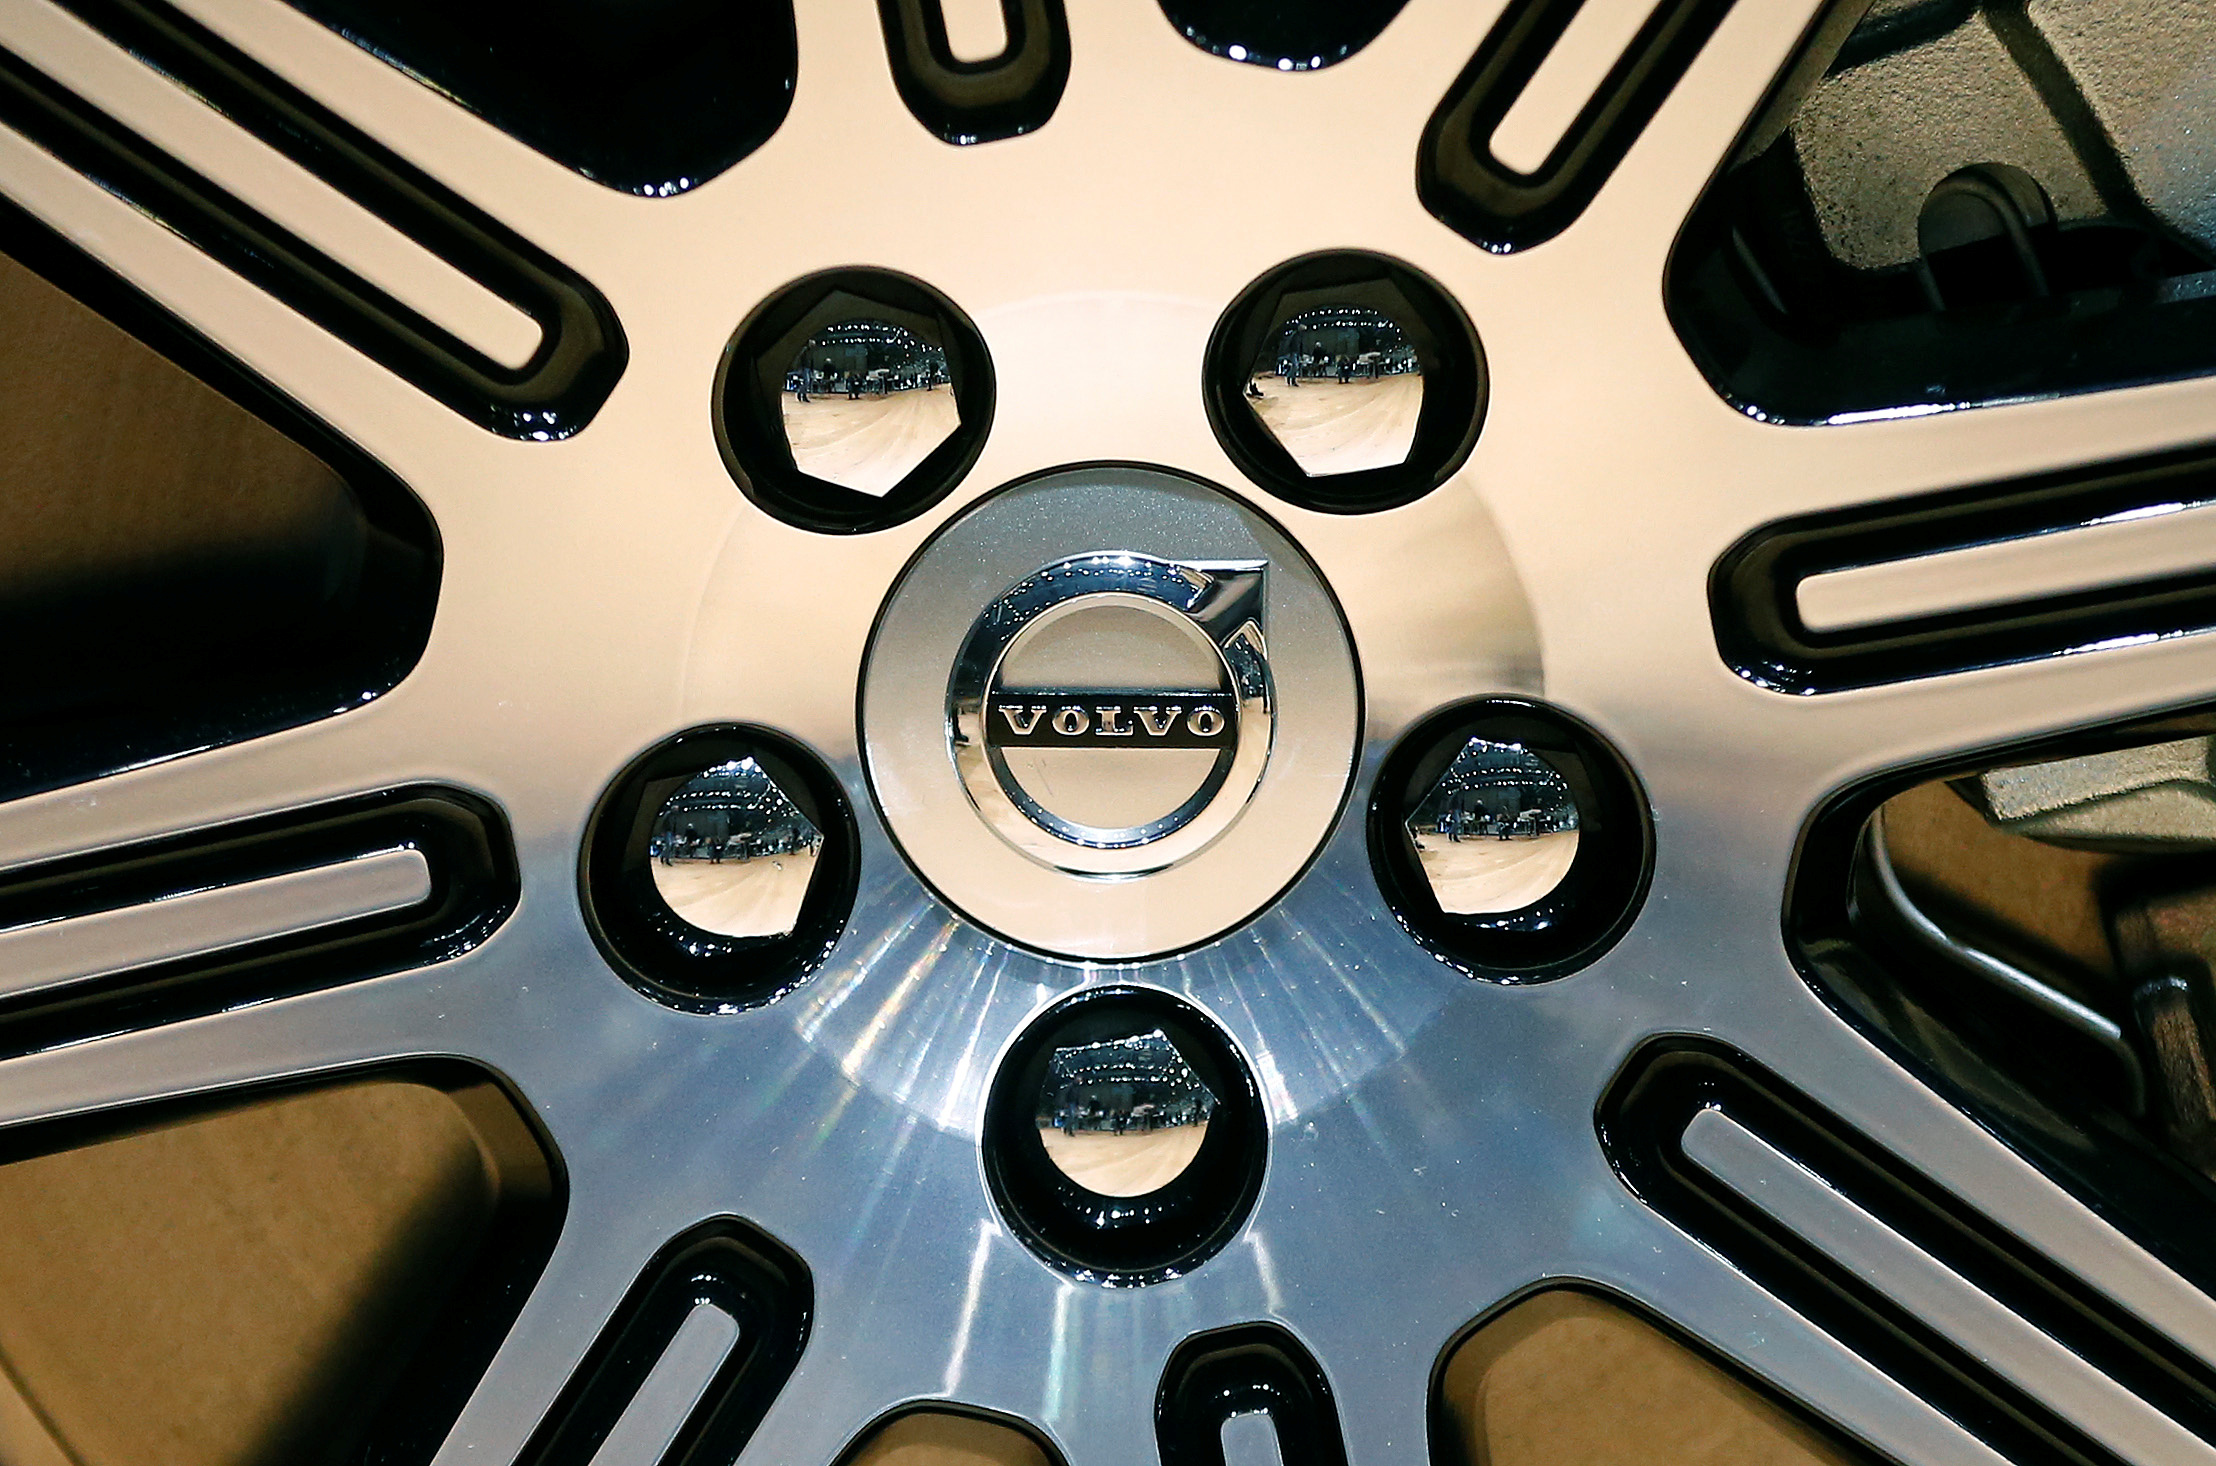 The wheel hub of a Volvo XC60 car is seen during the 87th International Motor Show at Palexpo in Geneva